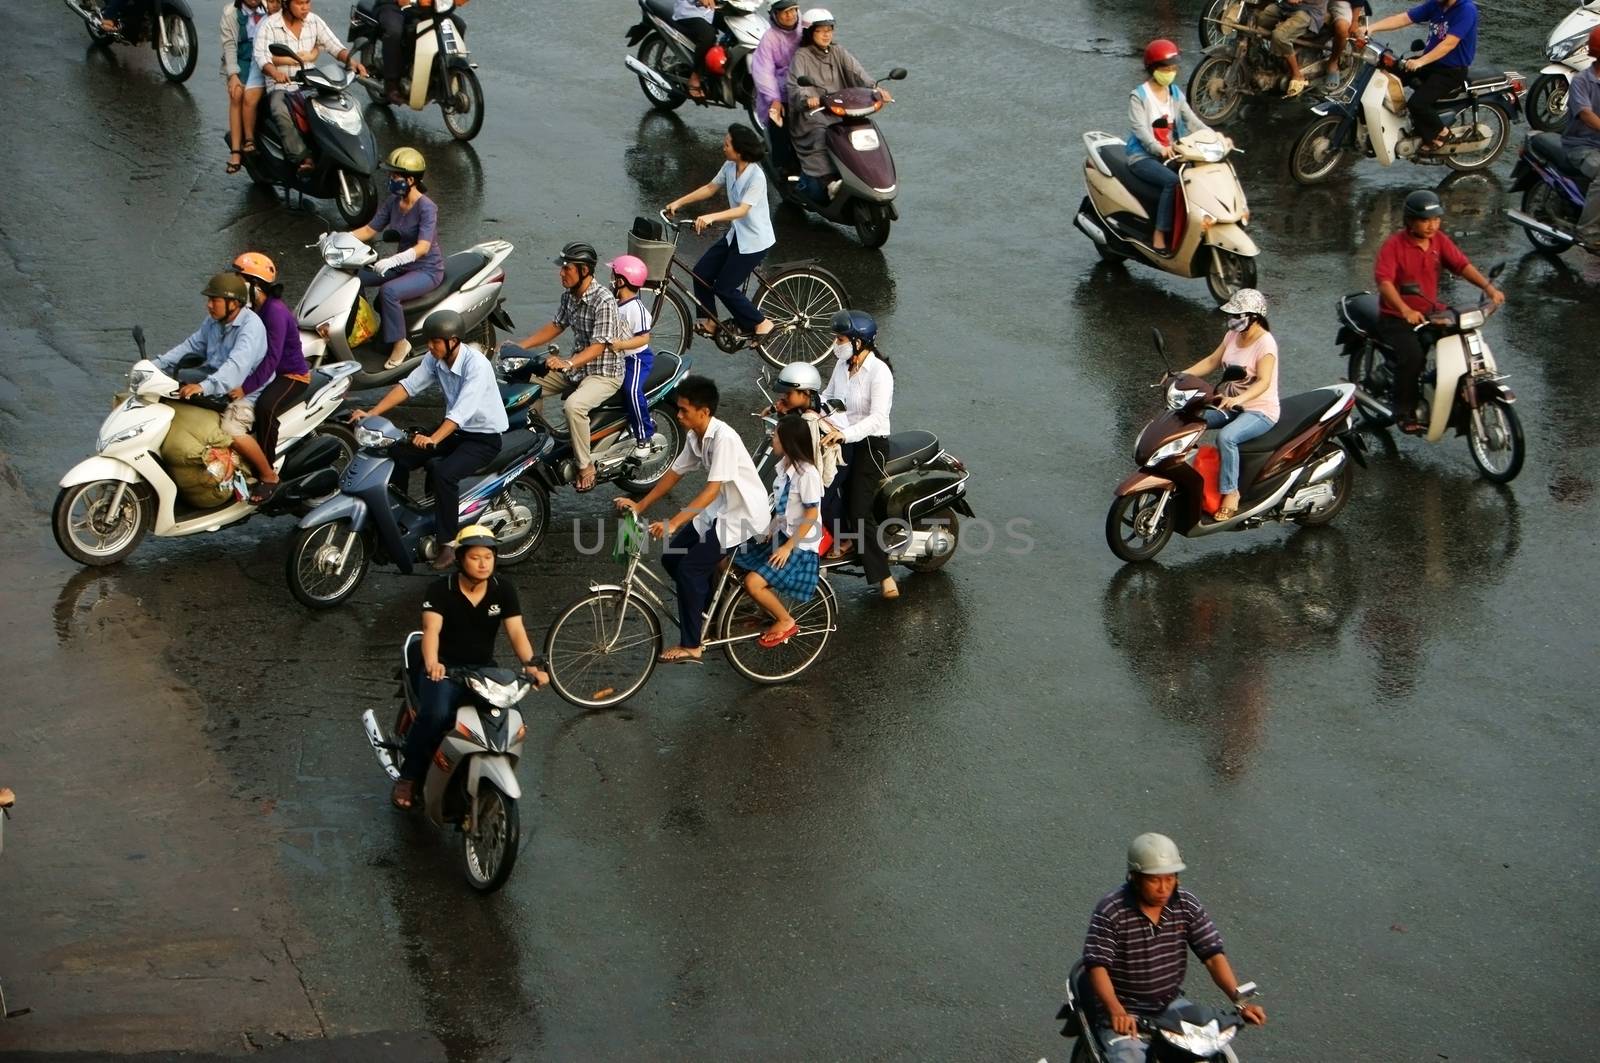 HO CHI MINH, VIET NAM, ASIA- NOV 22: Crowd of people wear helmet, ride motorcycle moving on street in rush hour, they pass by make chaotic traffice in Ho Chi Minh city, Vietnam, Asia on Dec 15, 2012